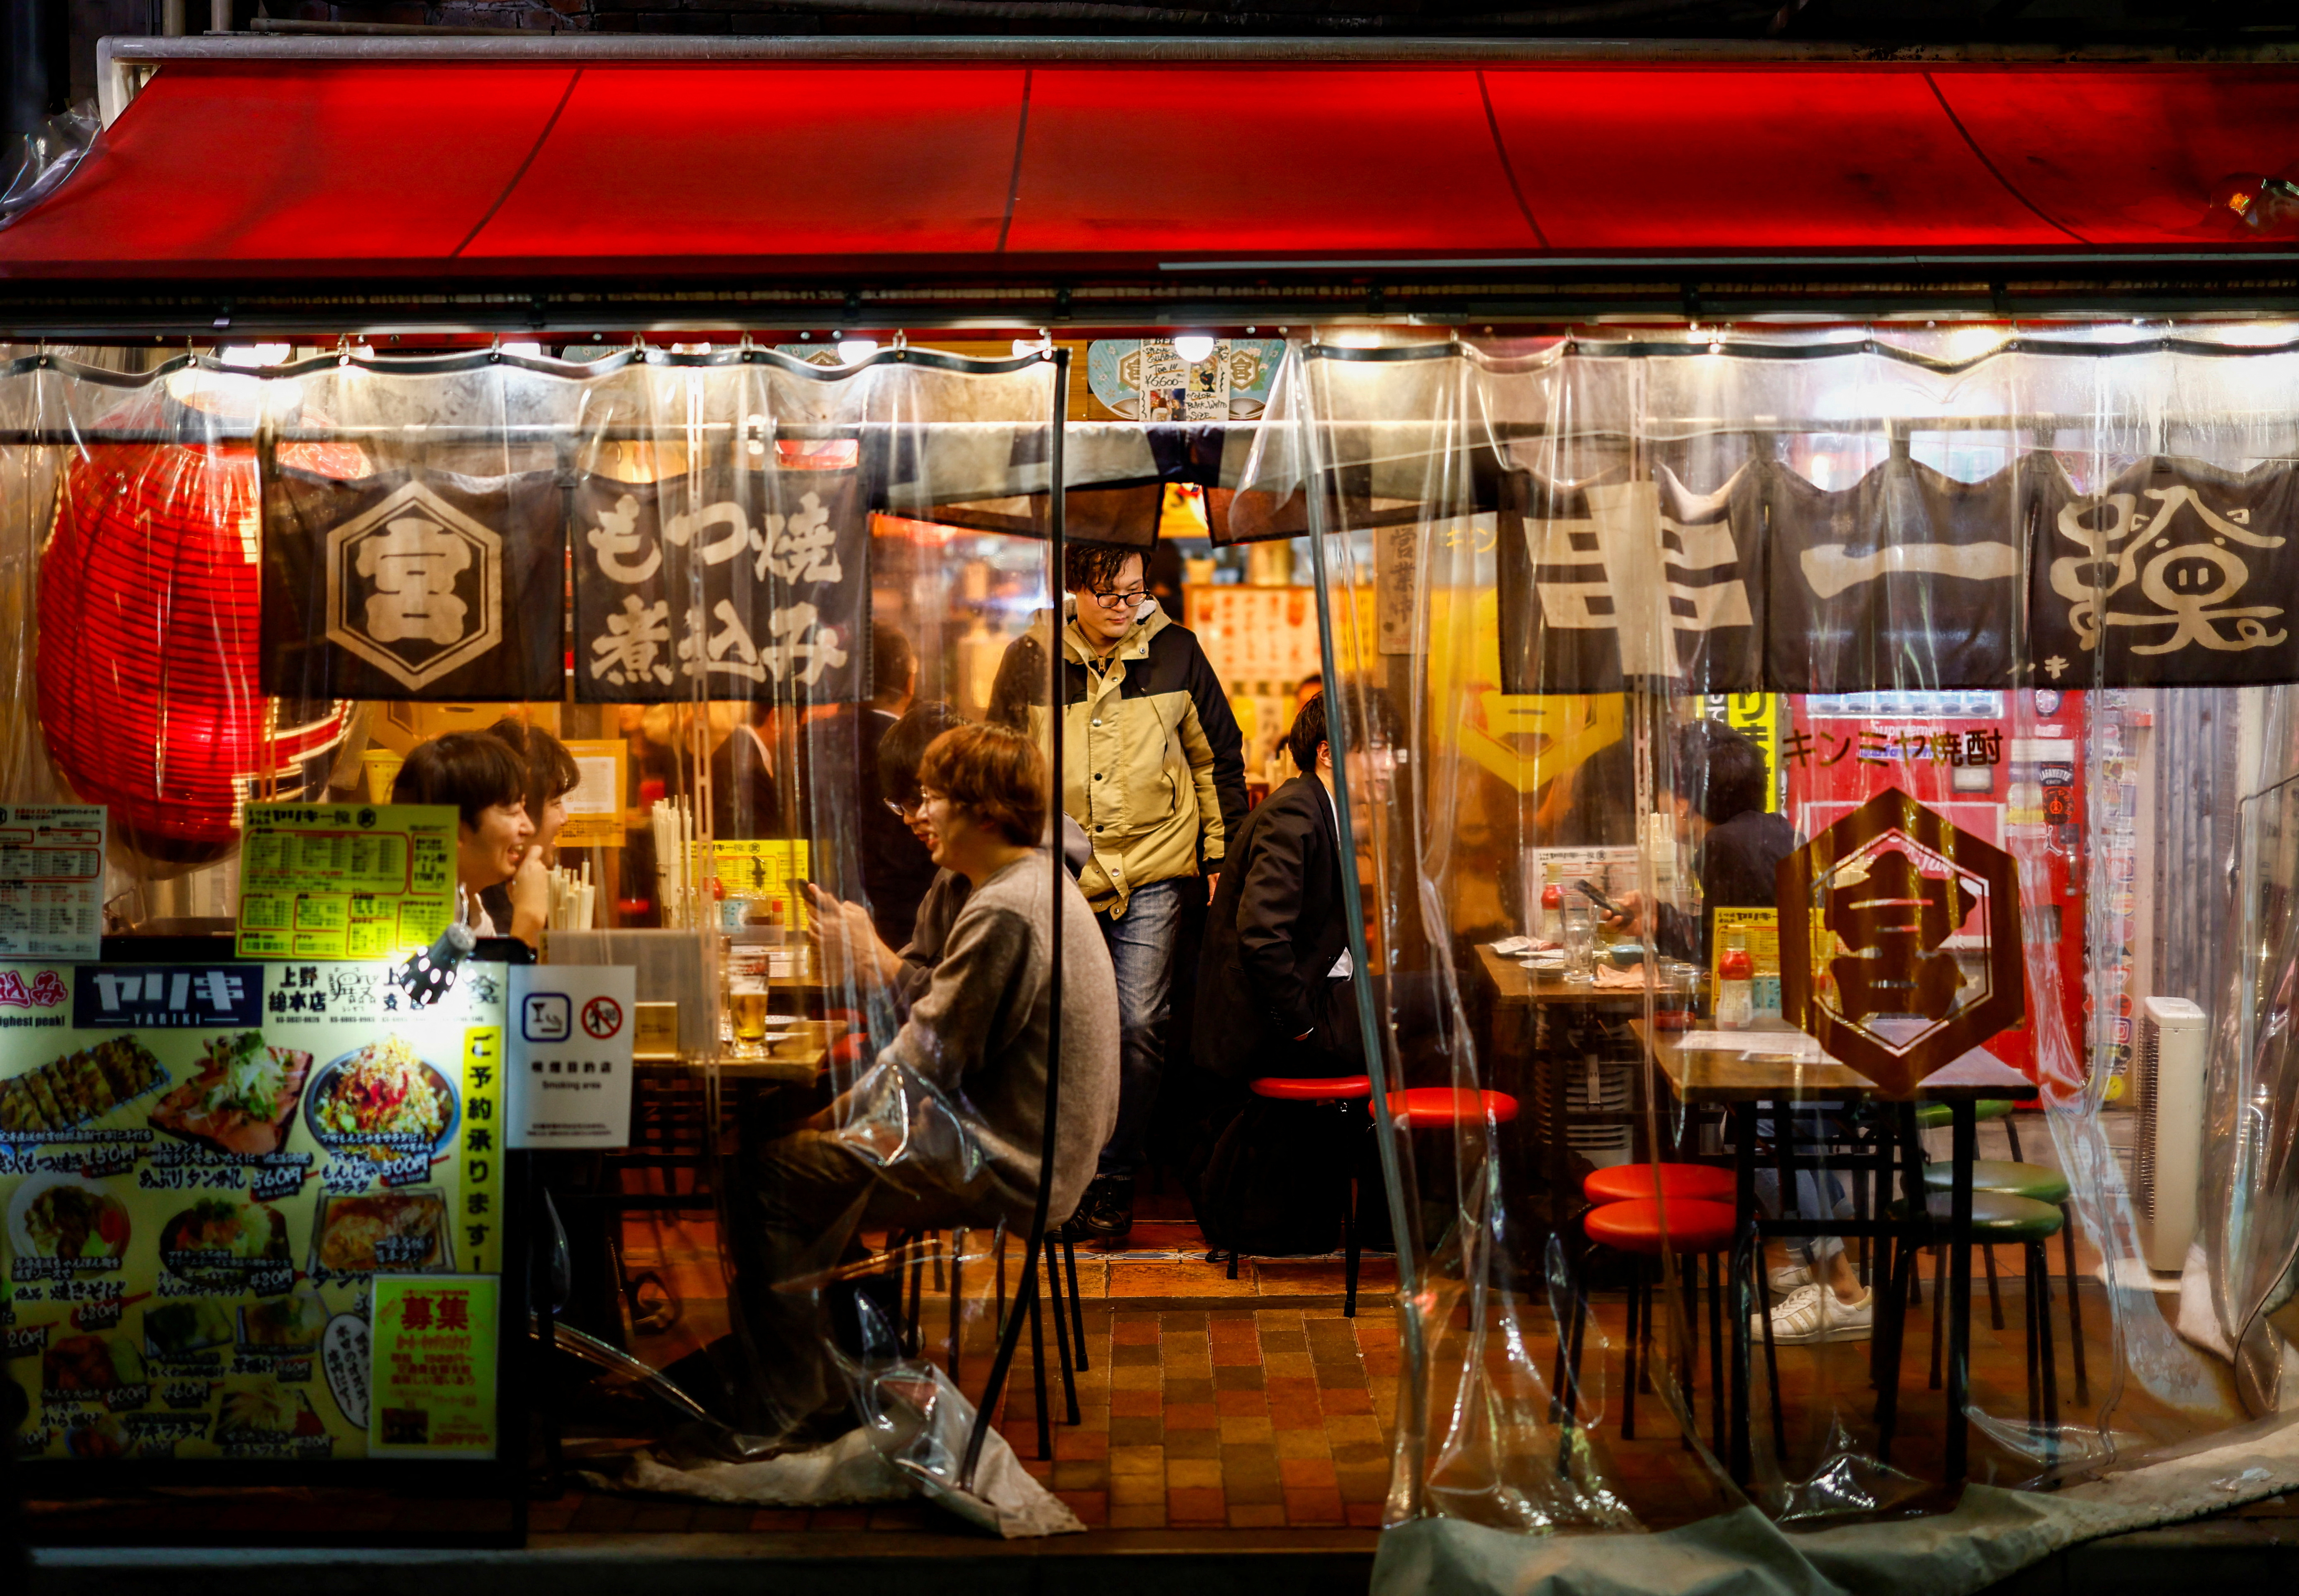 People enjoy drinks and food at an izakaya pub restaurant at the Ameyoko shopping district, in Tokyo